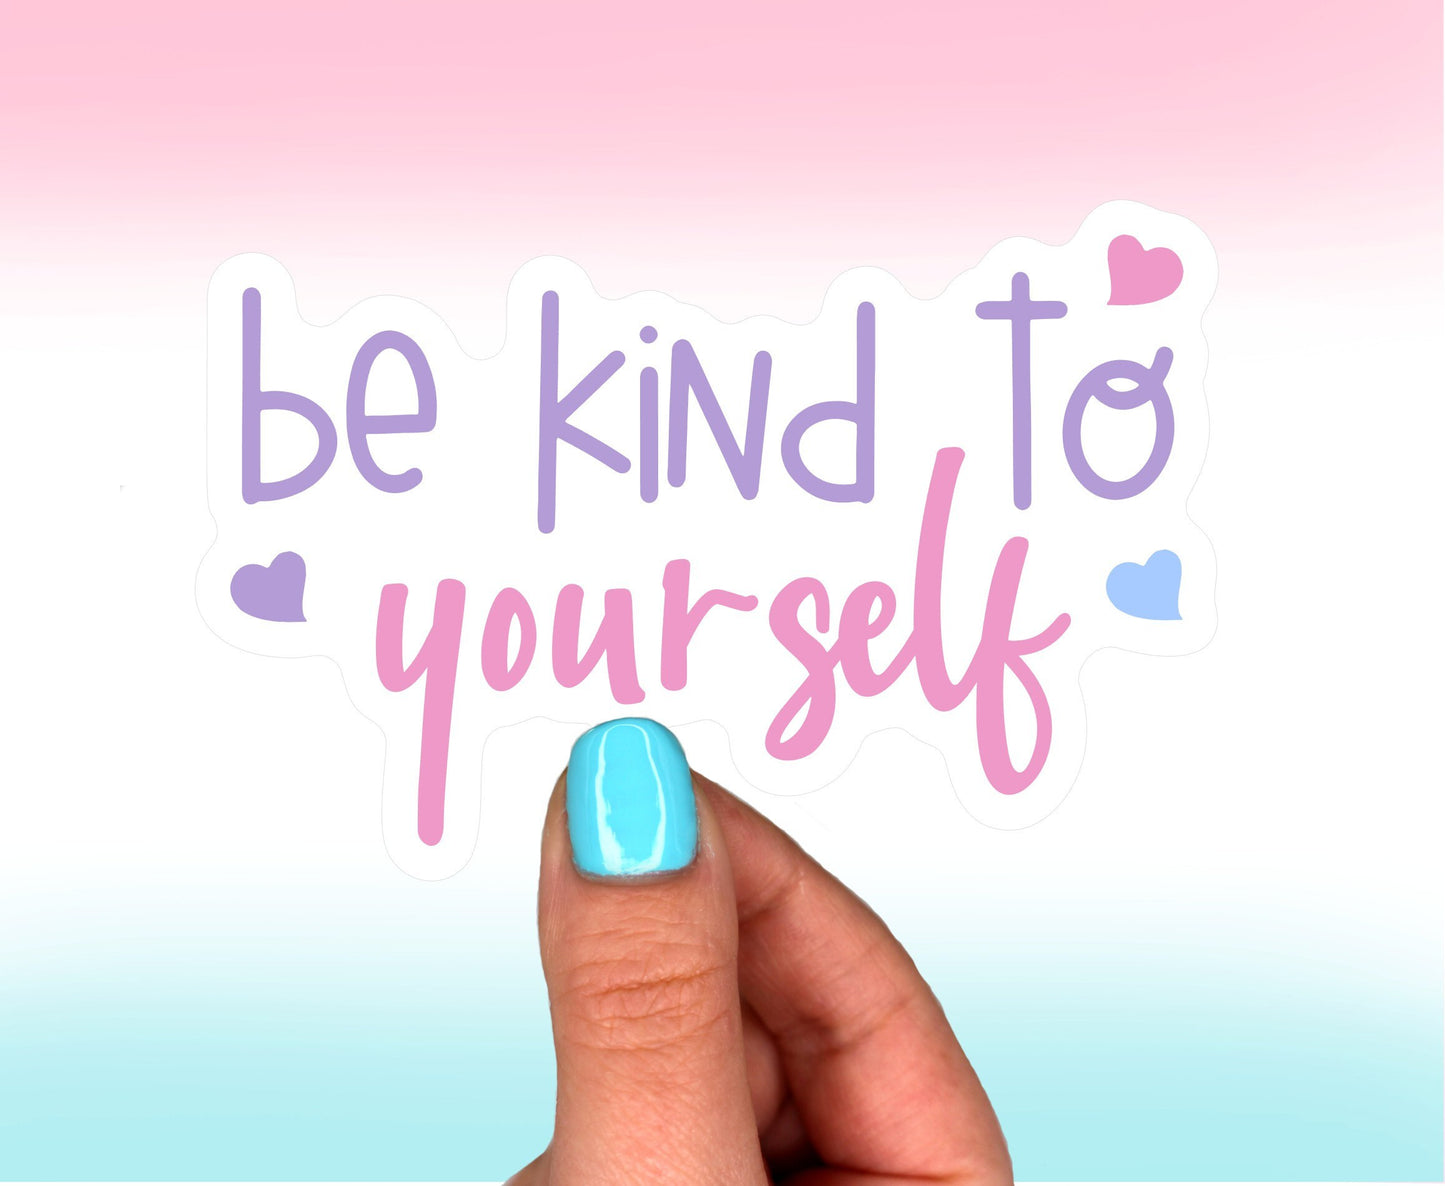 Be Kind To Yourself || Vinyl Sticker